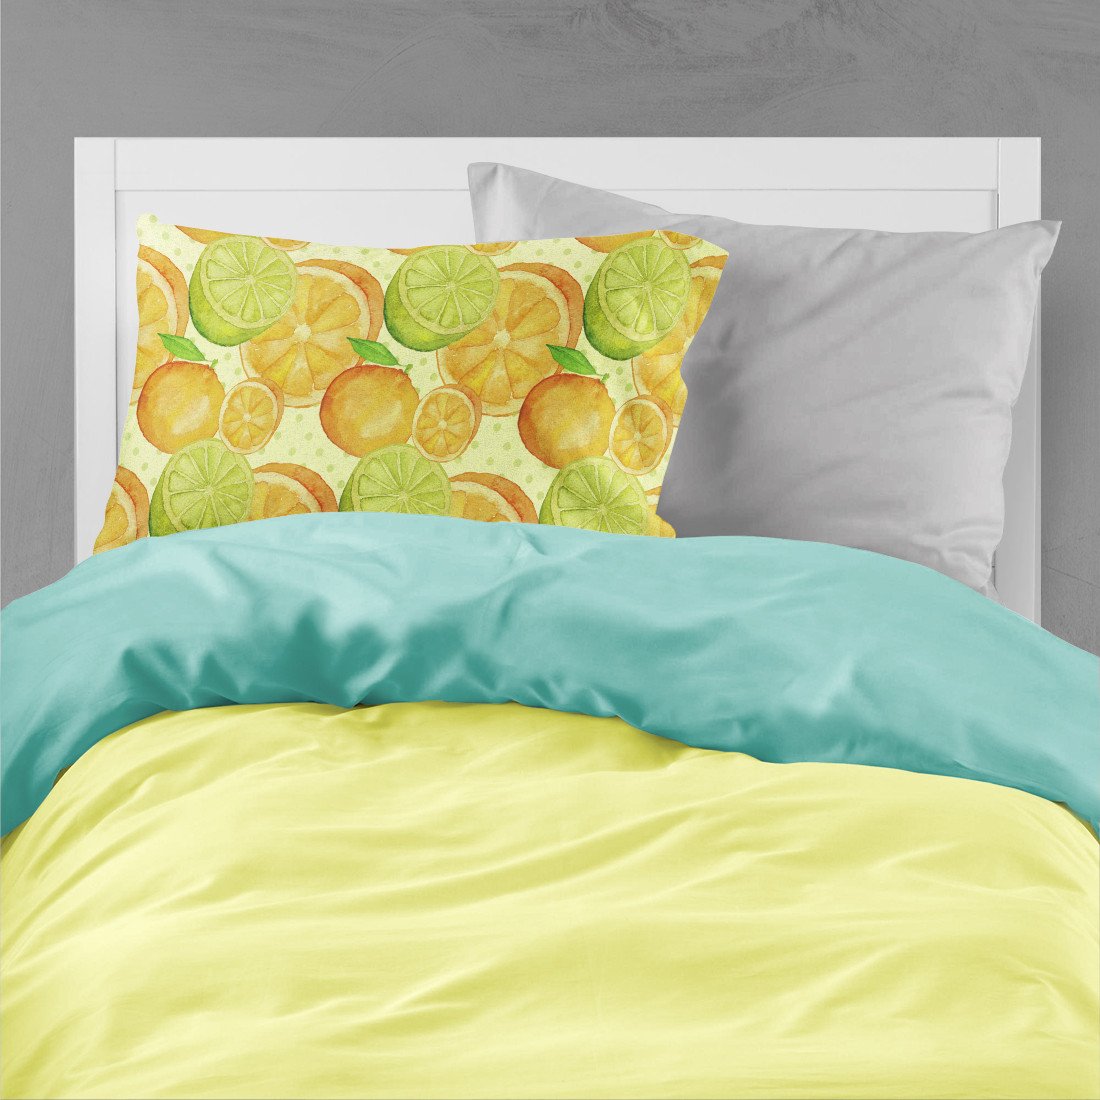 Watercolor Limes and Oranges Citrus Fabric Standard Pillowcase BB7517PILLOWCASE by Caroline's Treasures